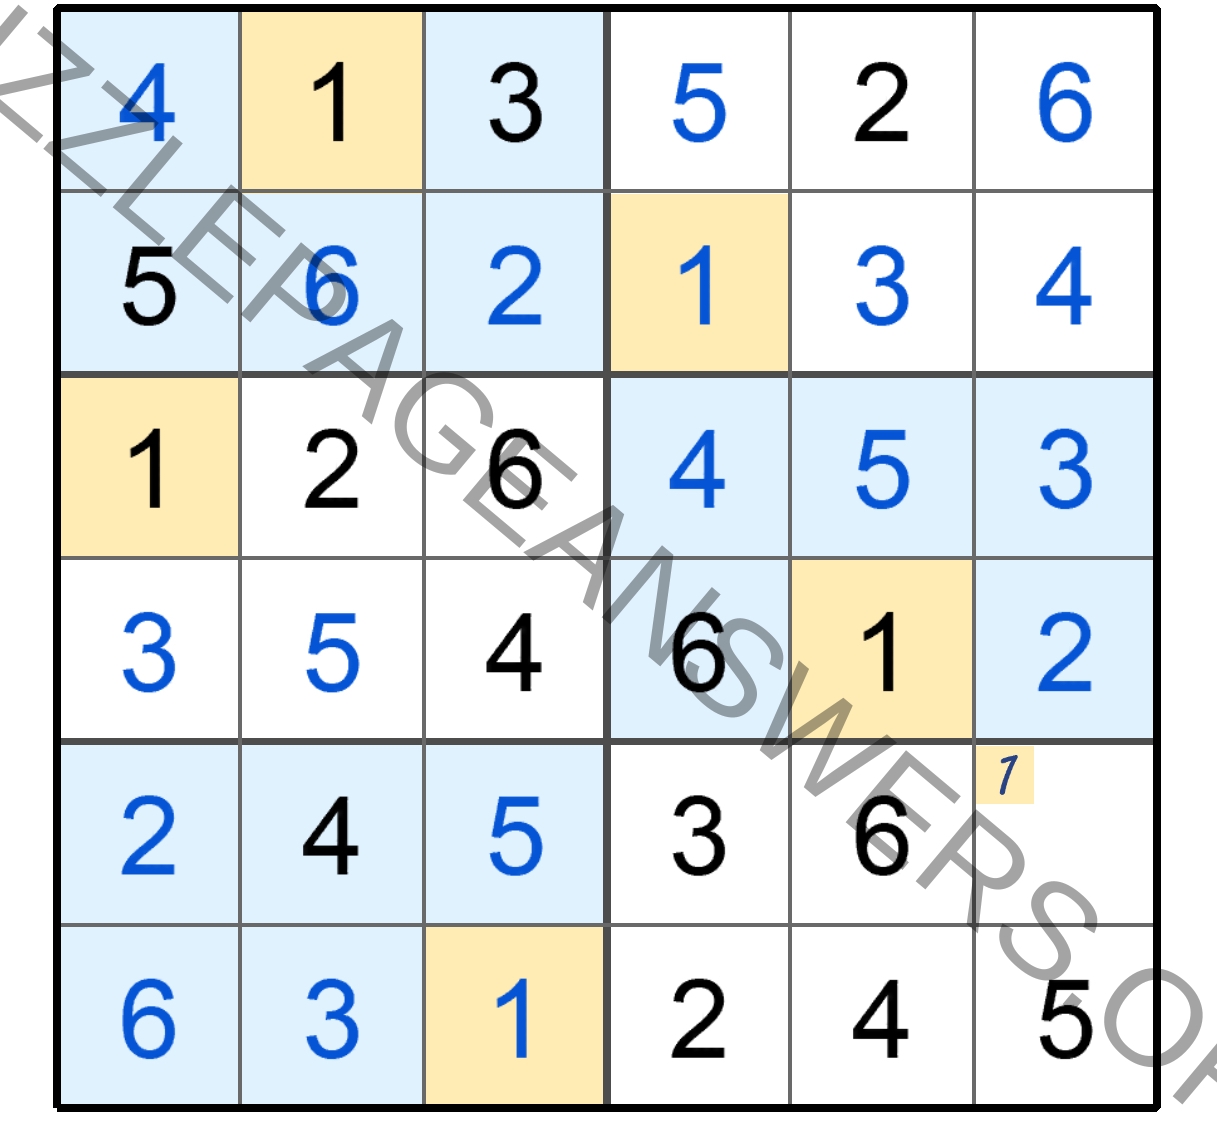 Puzzle Page Sudoku June 18 2021 Answers - Puzzle Page Answers